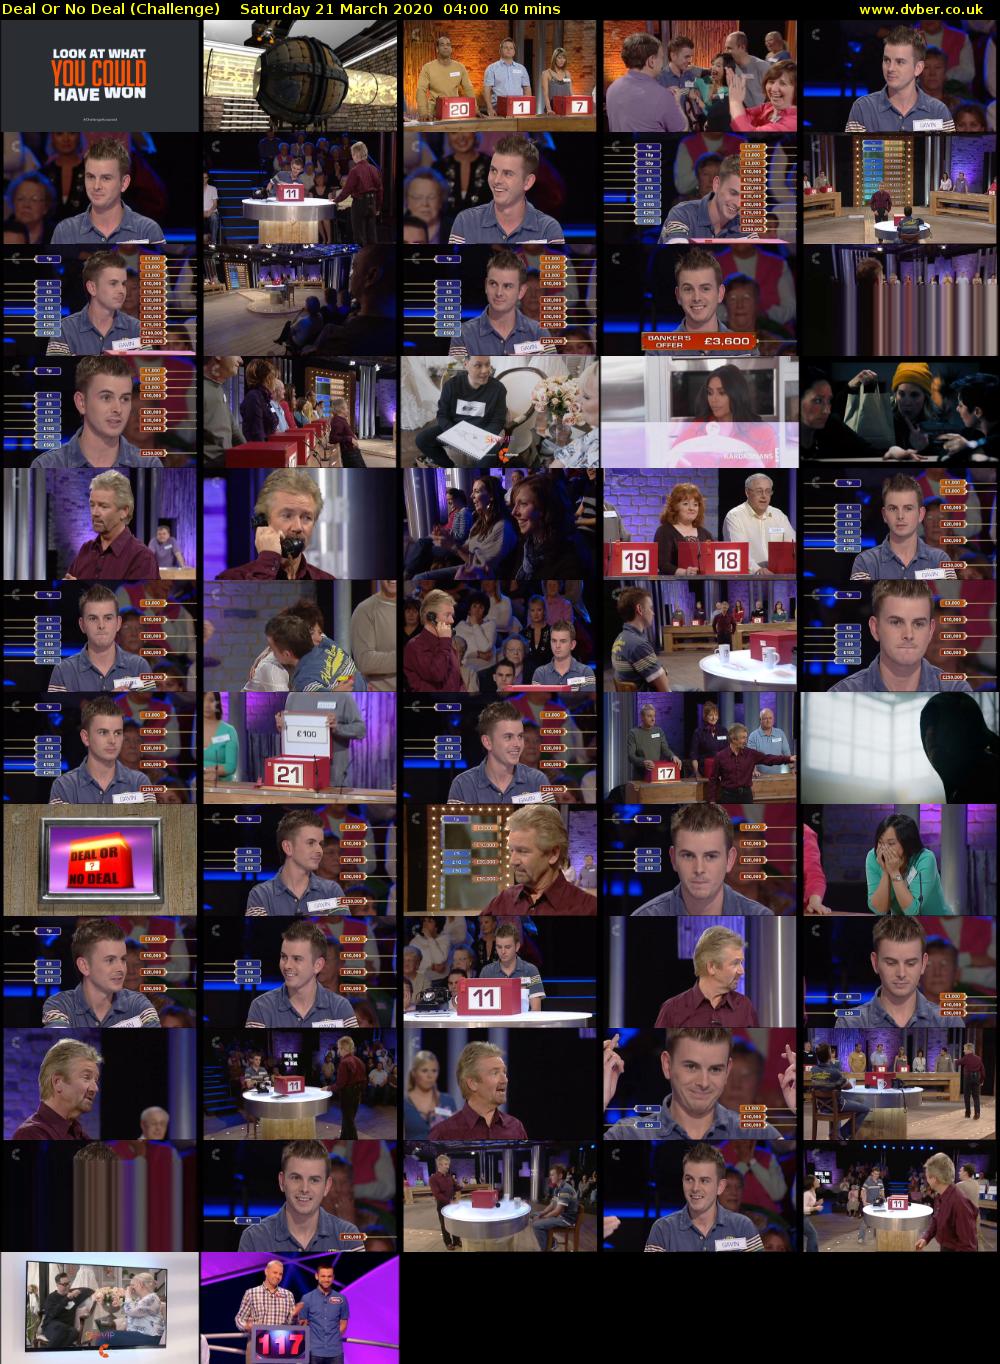 Deal Or No Deal (Challenge) Saturday 21 March 2020 04:00 - 04:40